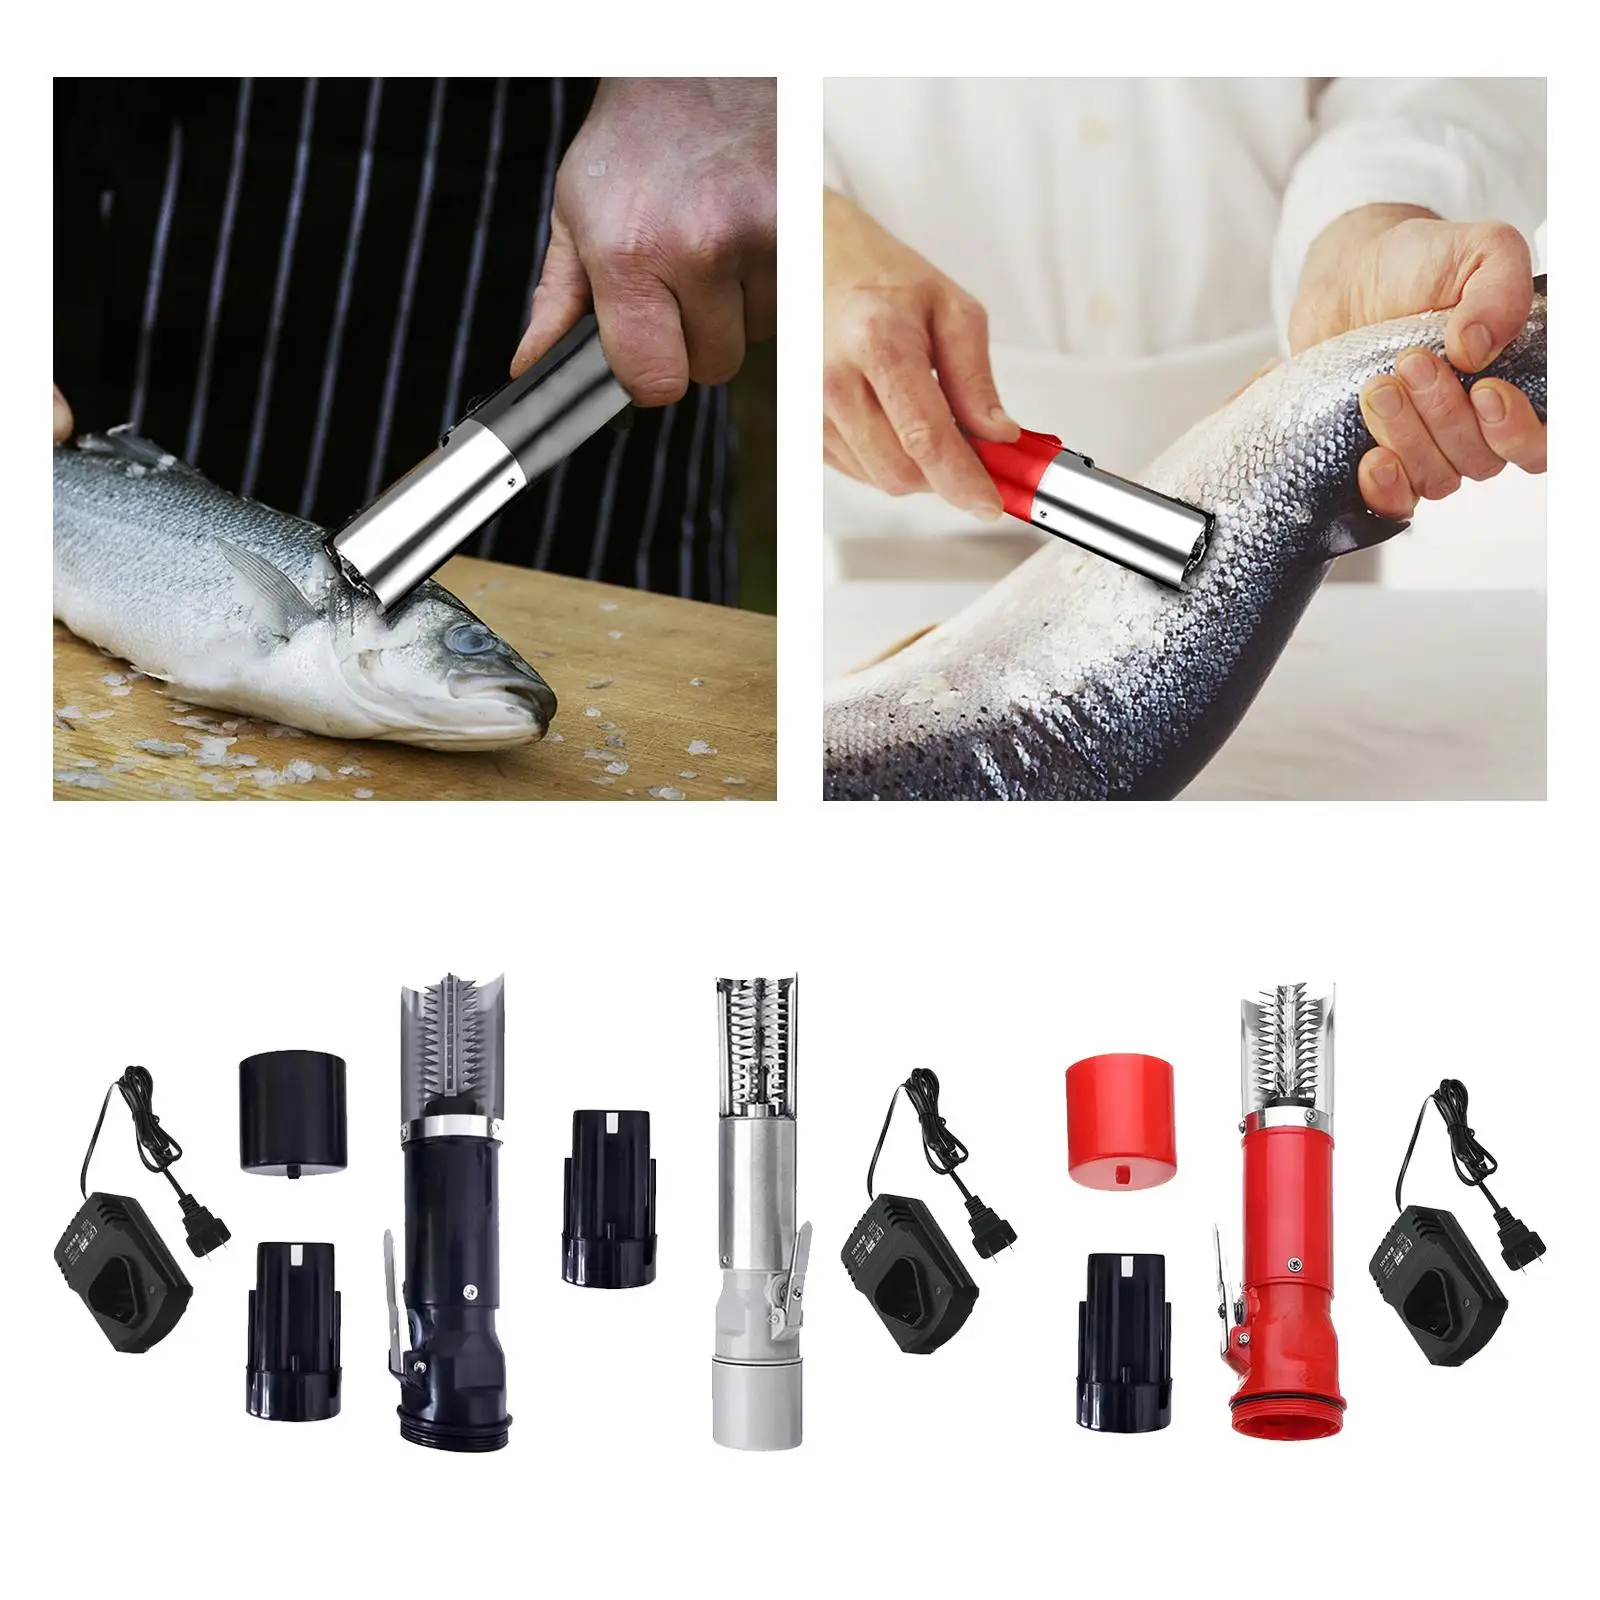 Electric Fish Scaler Automatic Fish Scale Cleaning Seafood Tools Easily Remove Fish Scales for Restaurant